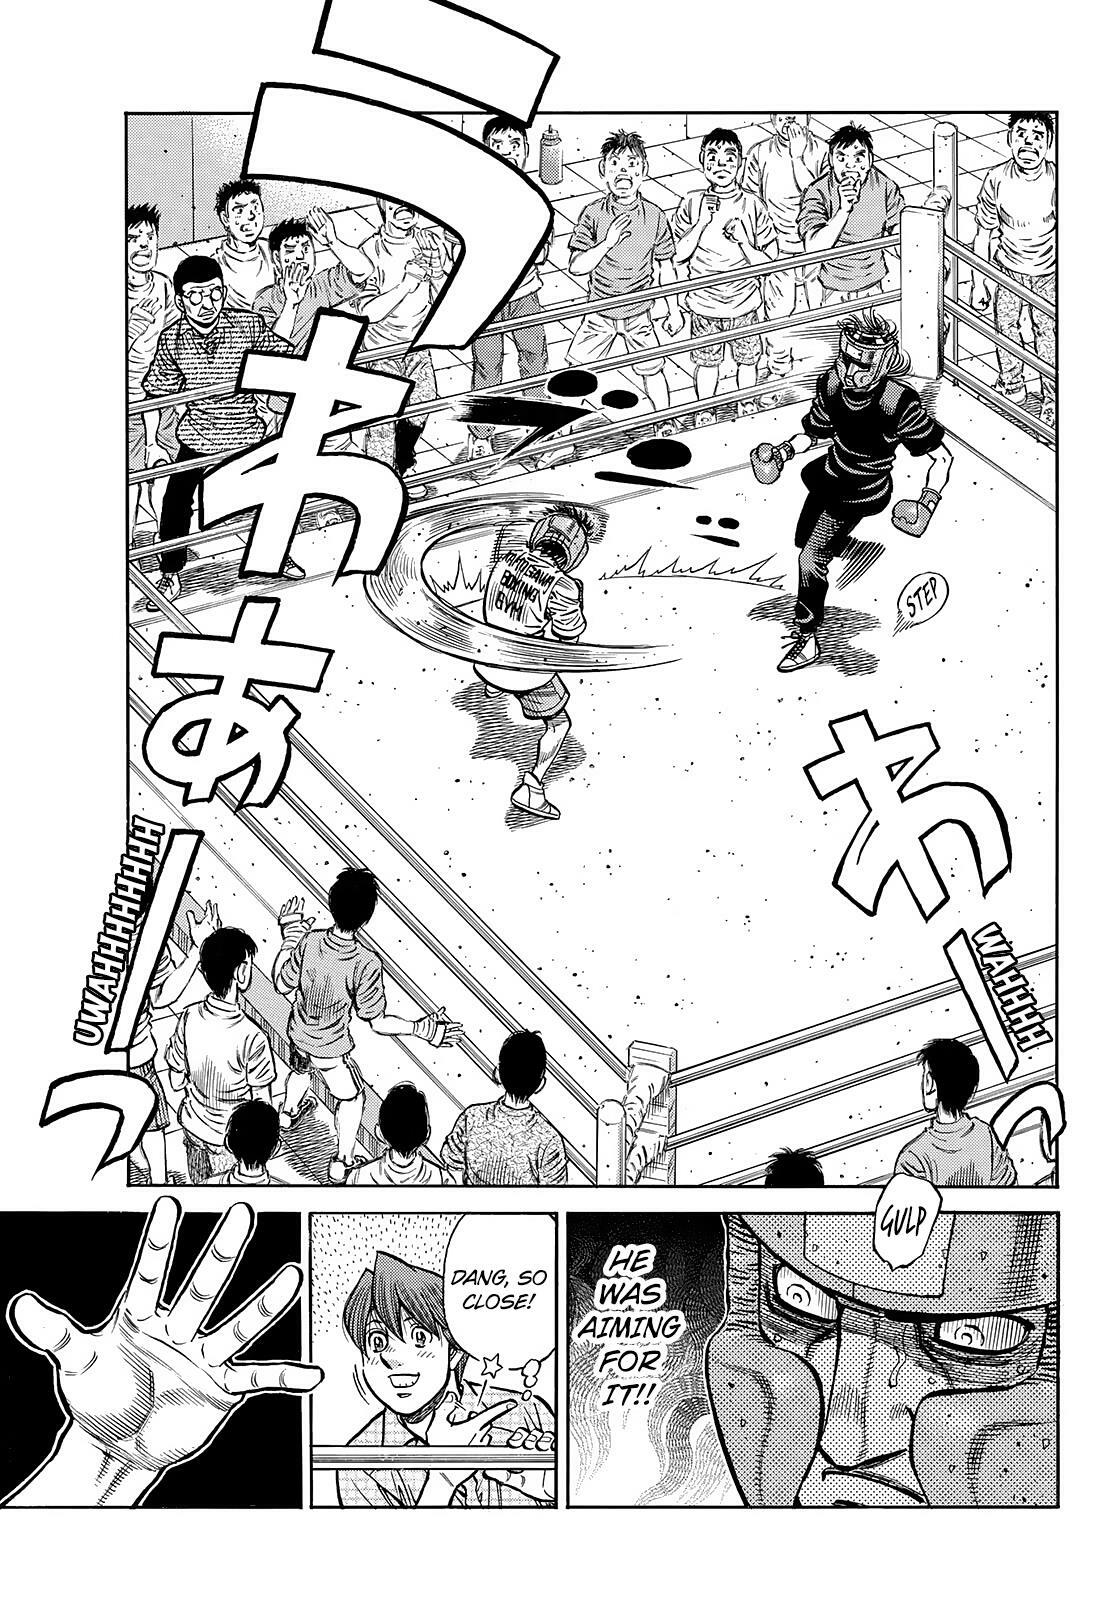 🥊THE PERFECT COPY🥊 Hajime no Ippo Chapters 1436-1437 Live